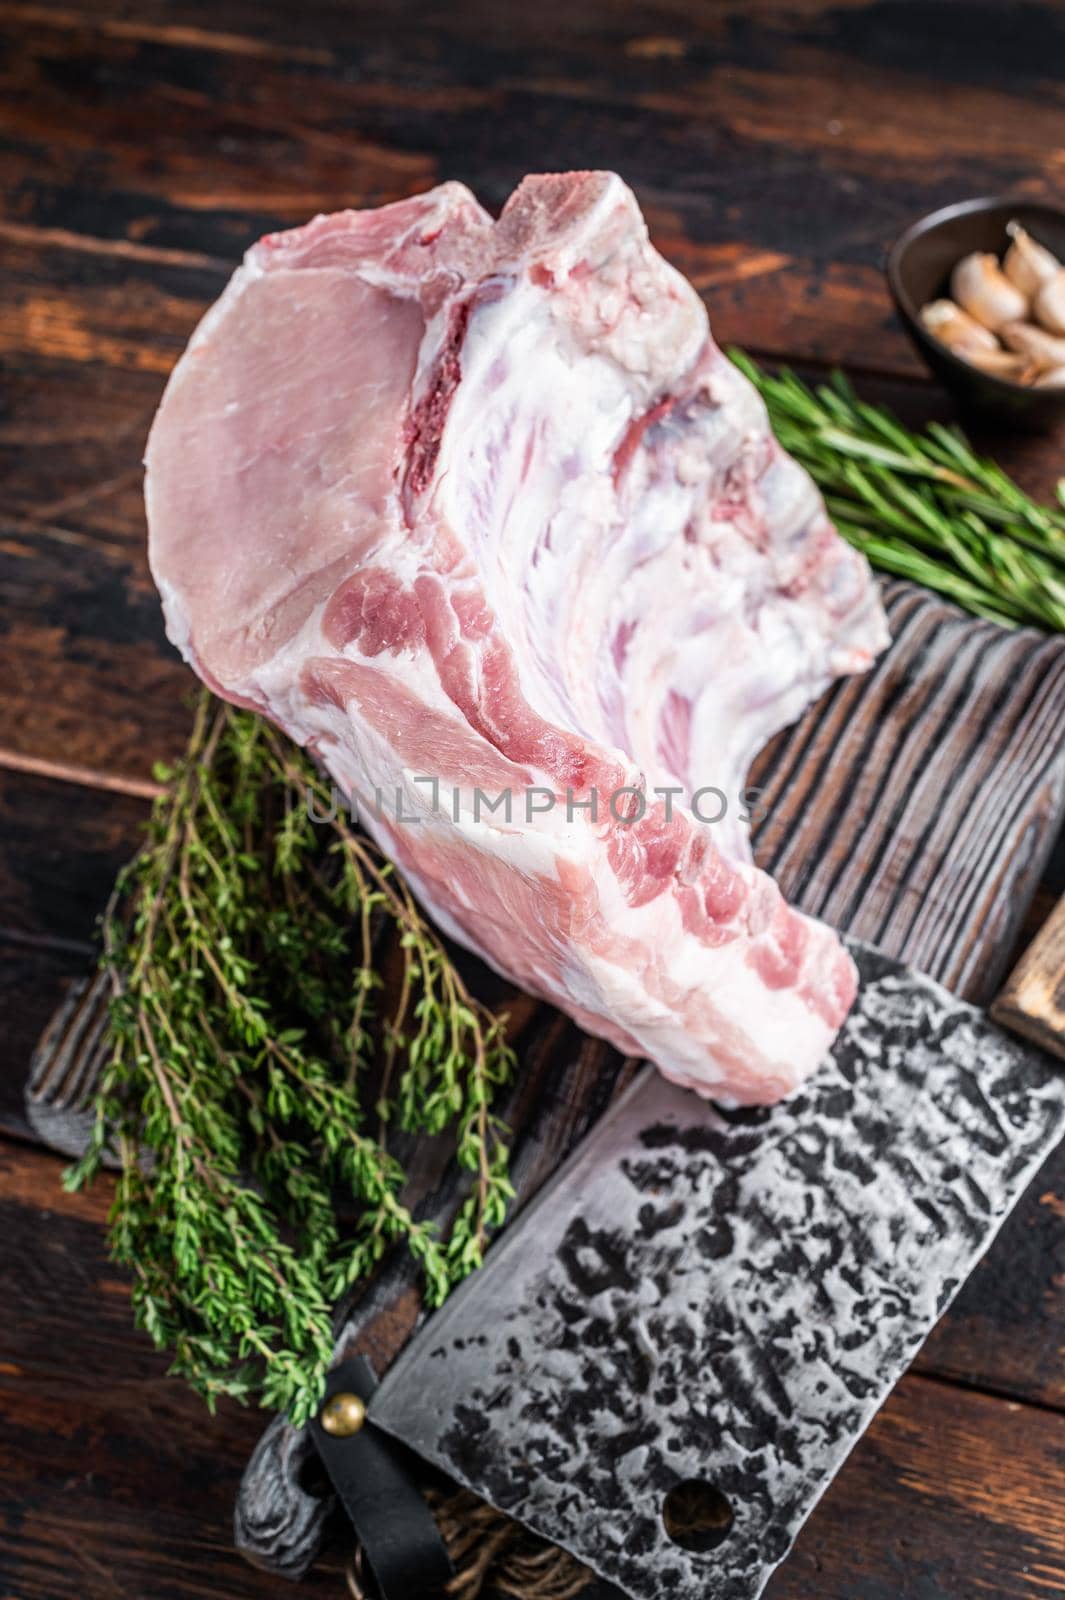 Raw rack of pork loin chops with ribs on a butcher board with meat cleaver. Dark wooden background. Top view by Composter